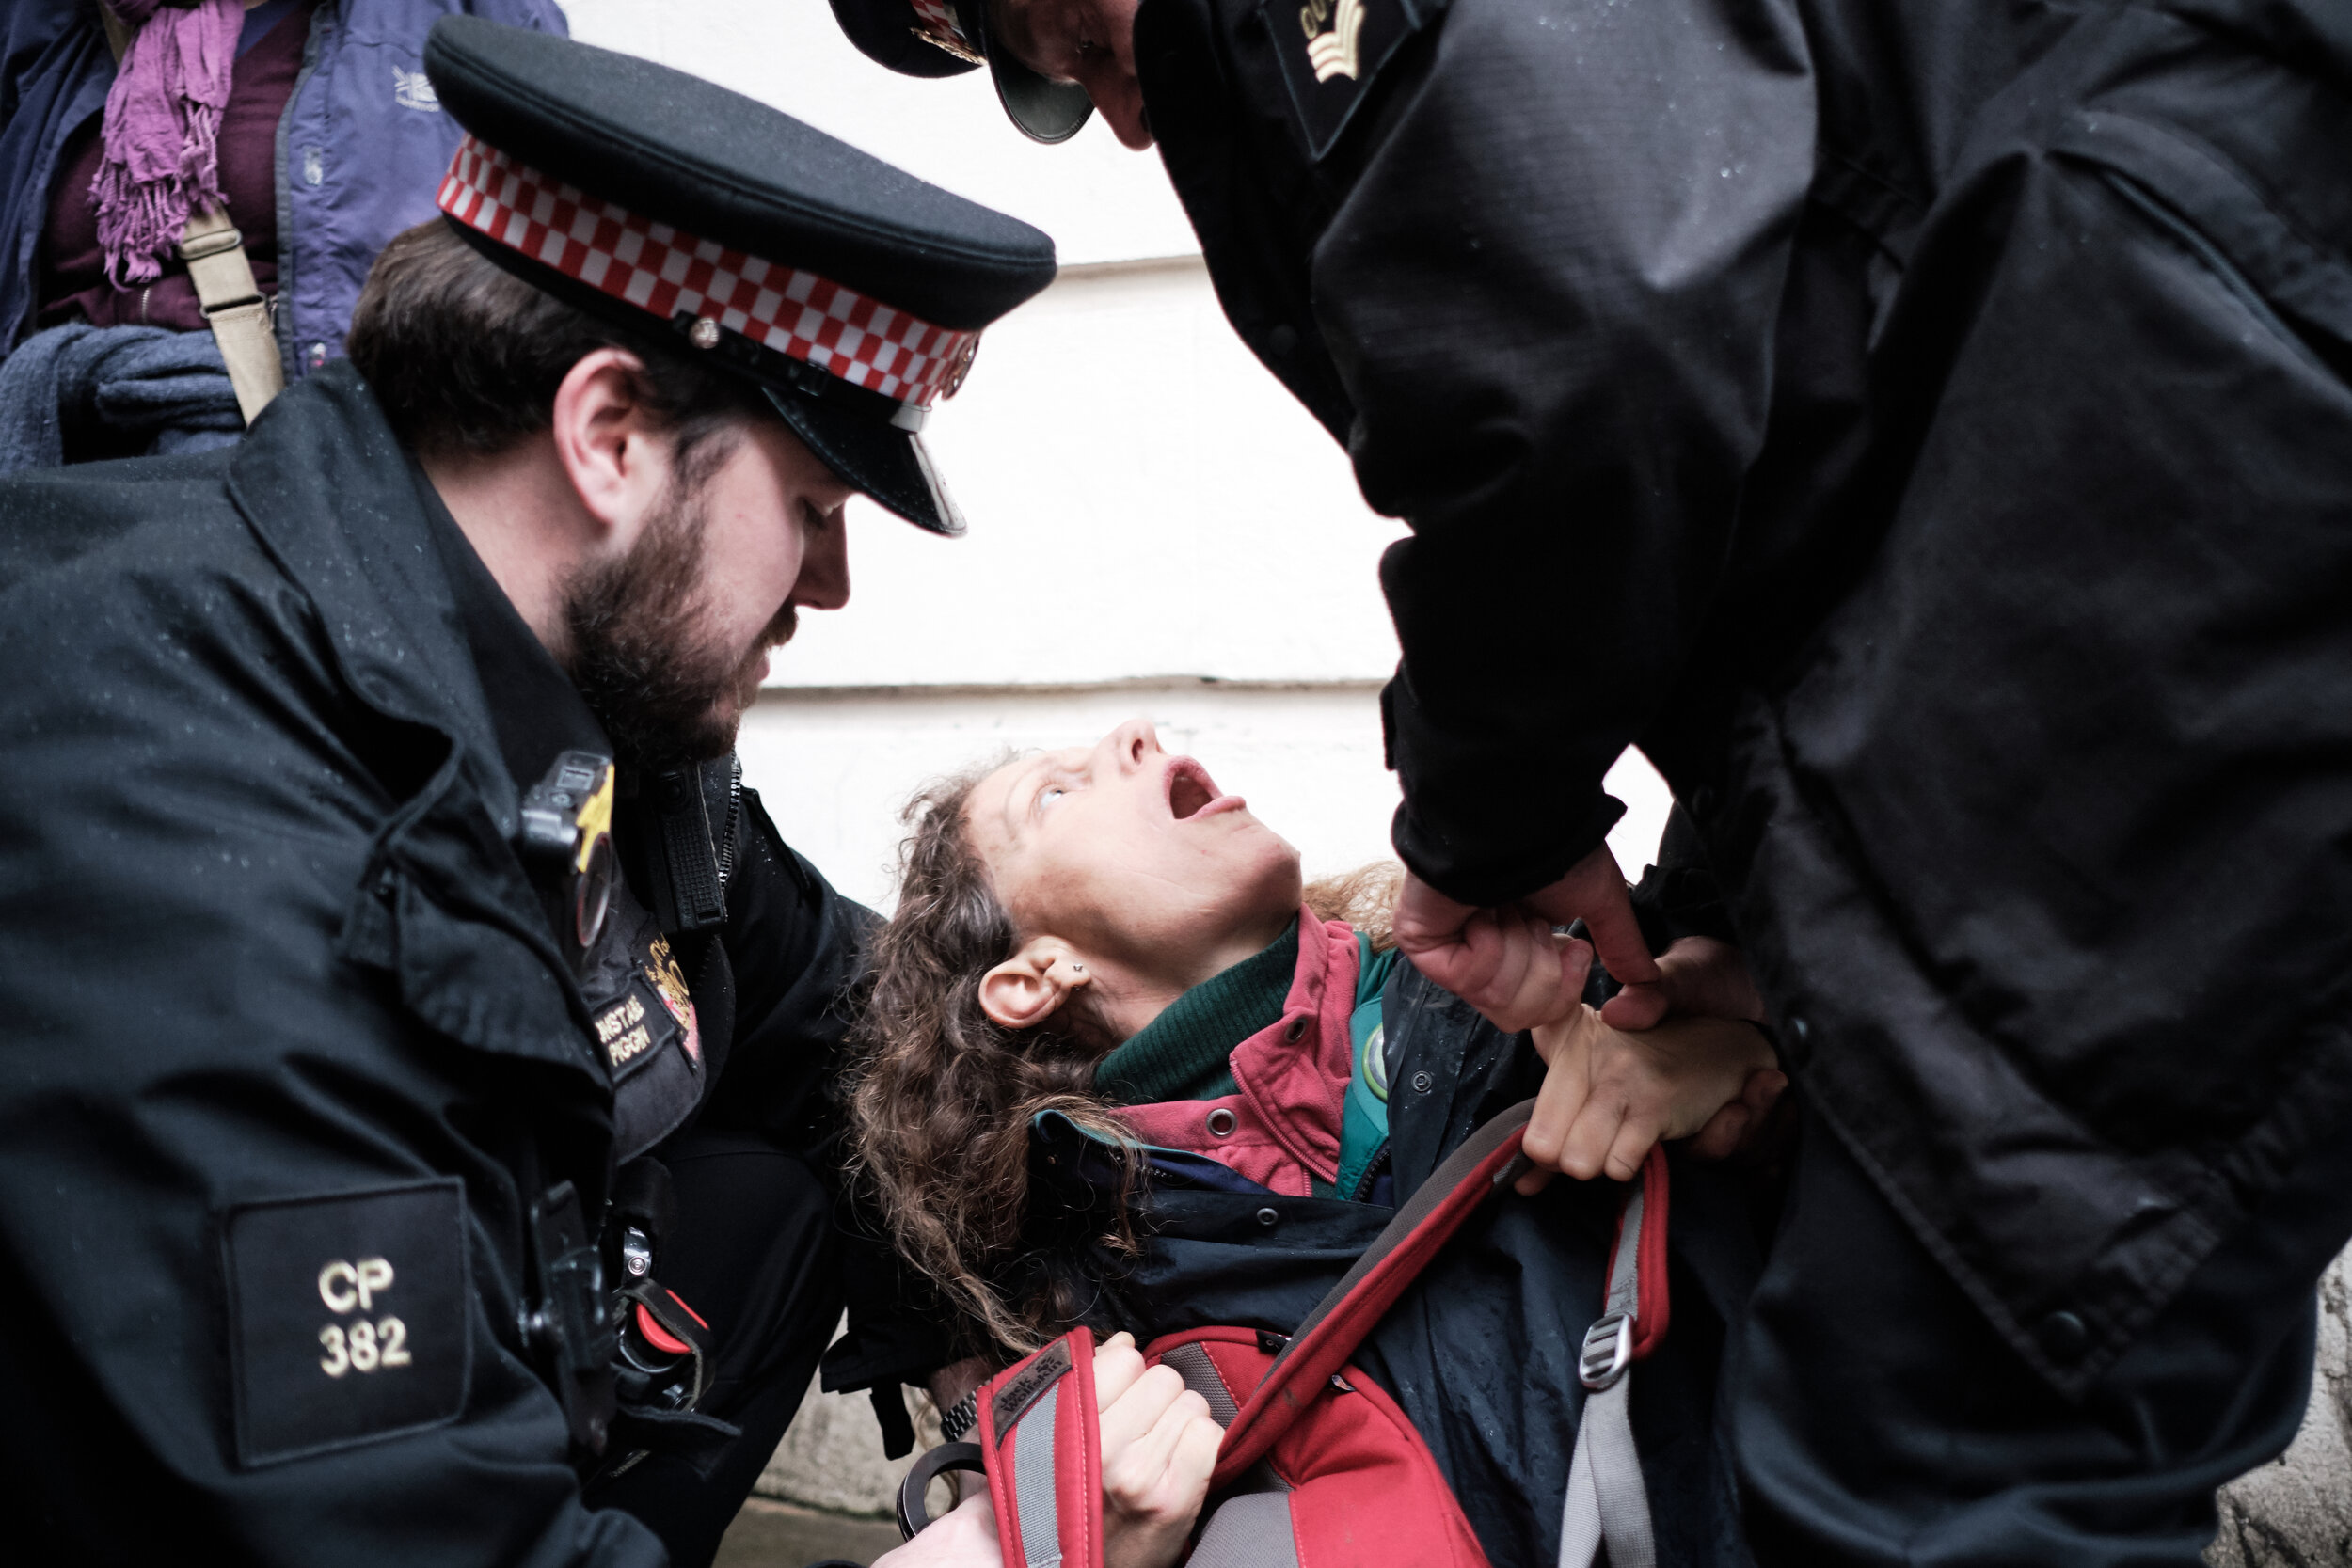  For the first time in Extinction Rebellion’s uprising history, police began to use so-called ‘pain and compliance’. Fingers were broken, but not on this particular occasion. The technique was first employed at the London City Airport protests the pr